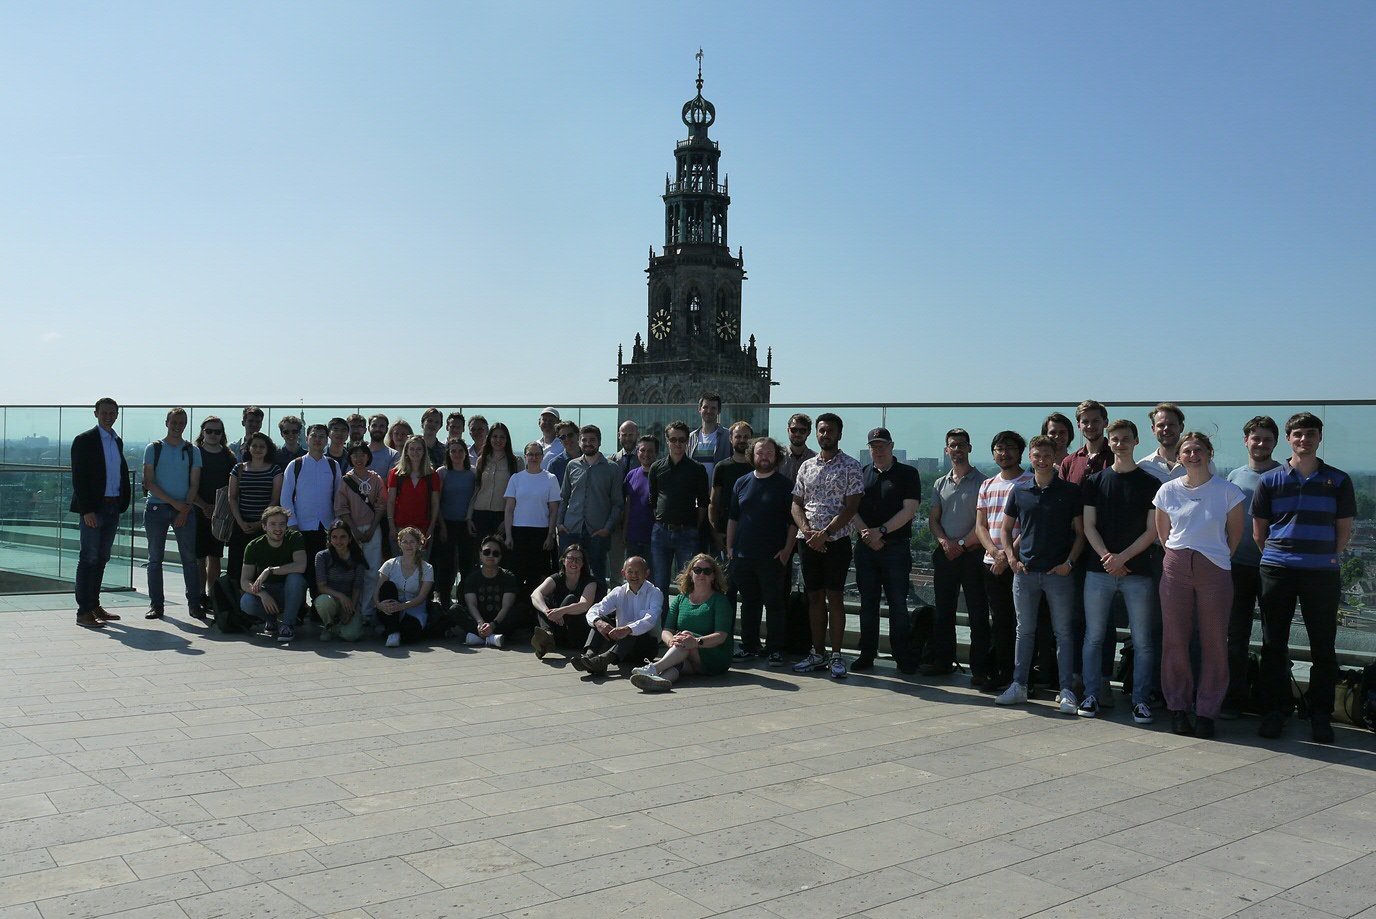 Visit of ARCNL to Groningen - Group picture on the roof of the Groningen Forum